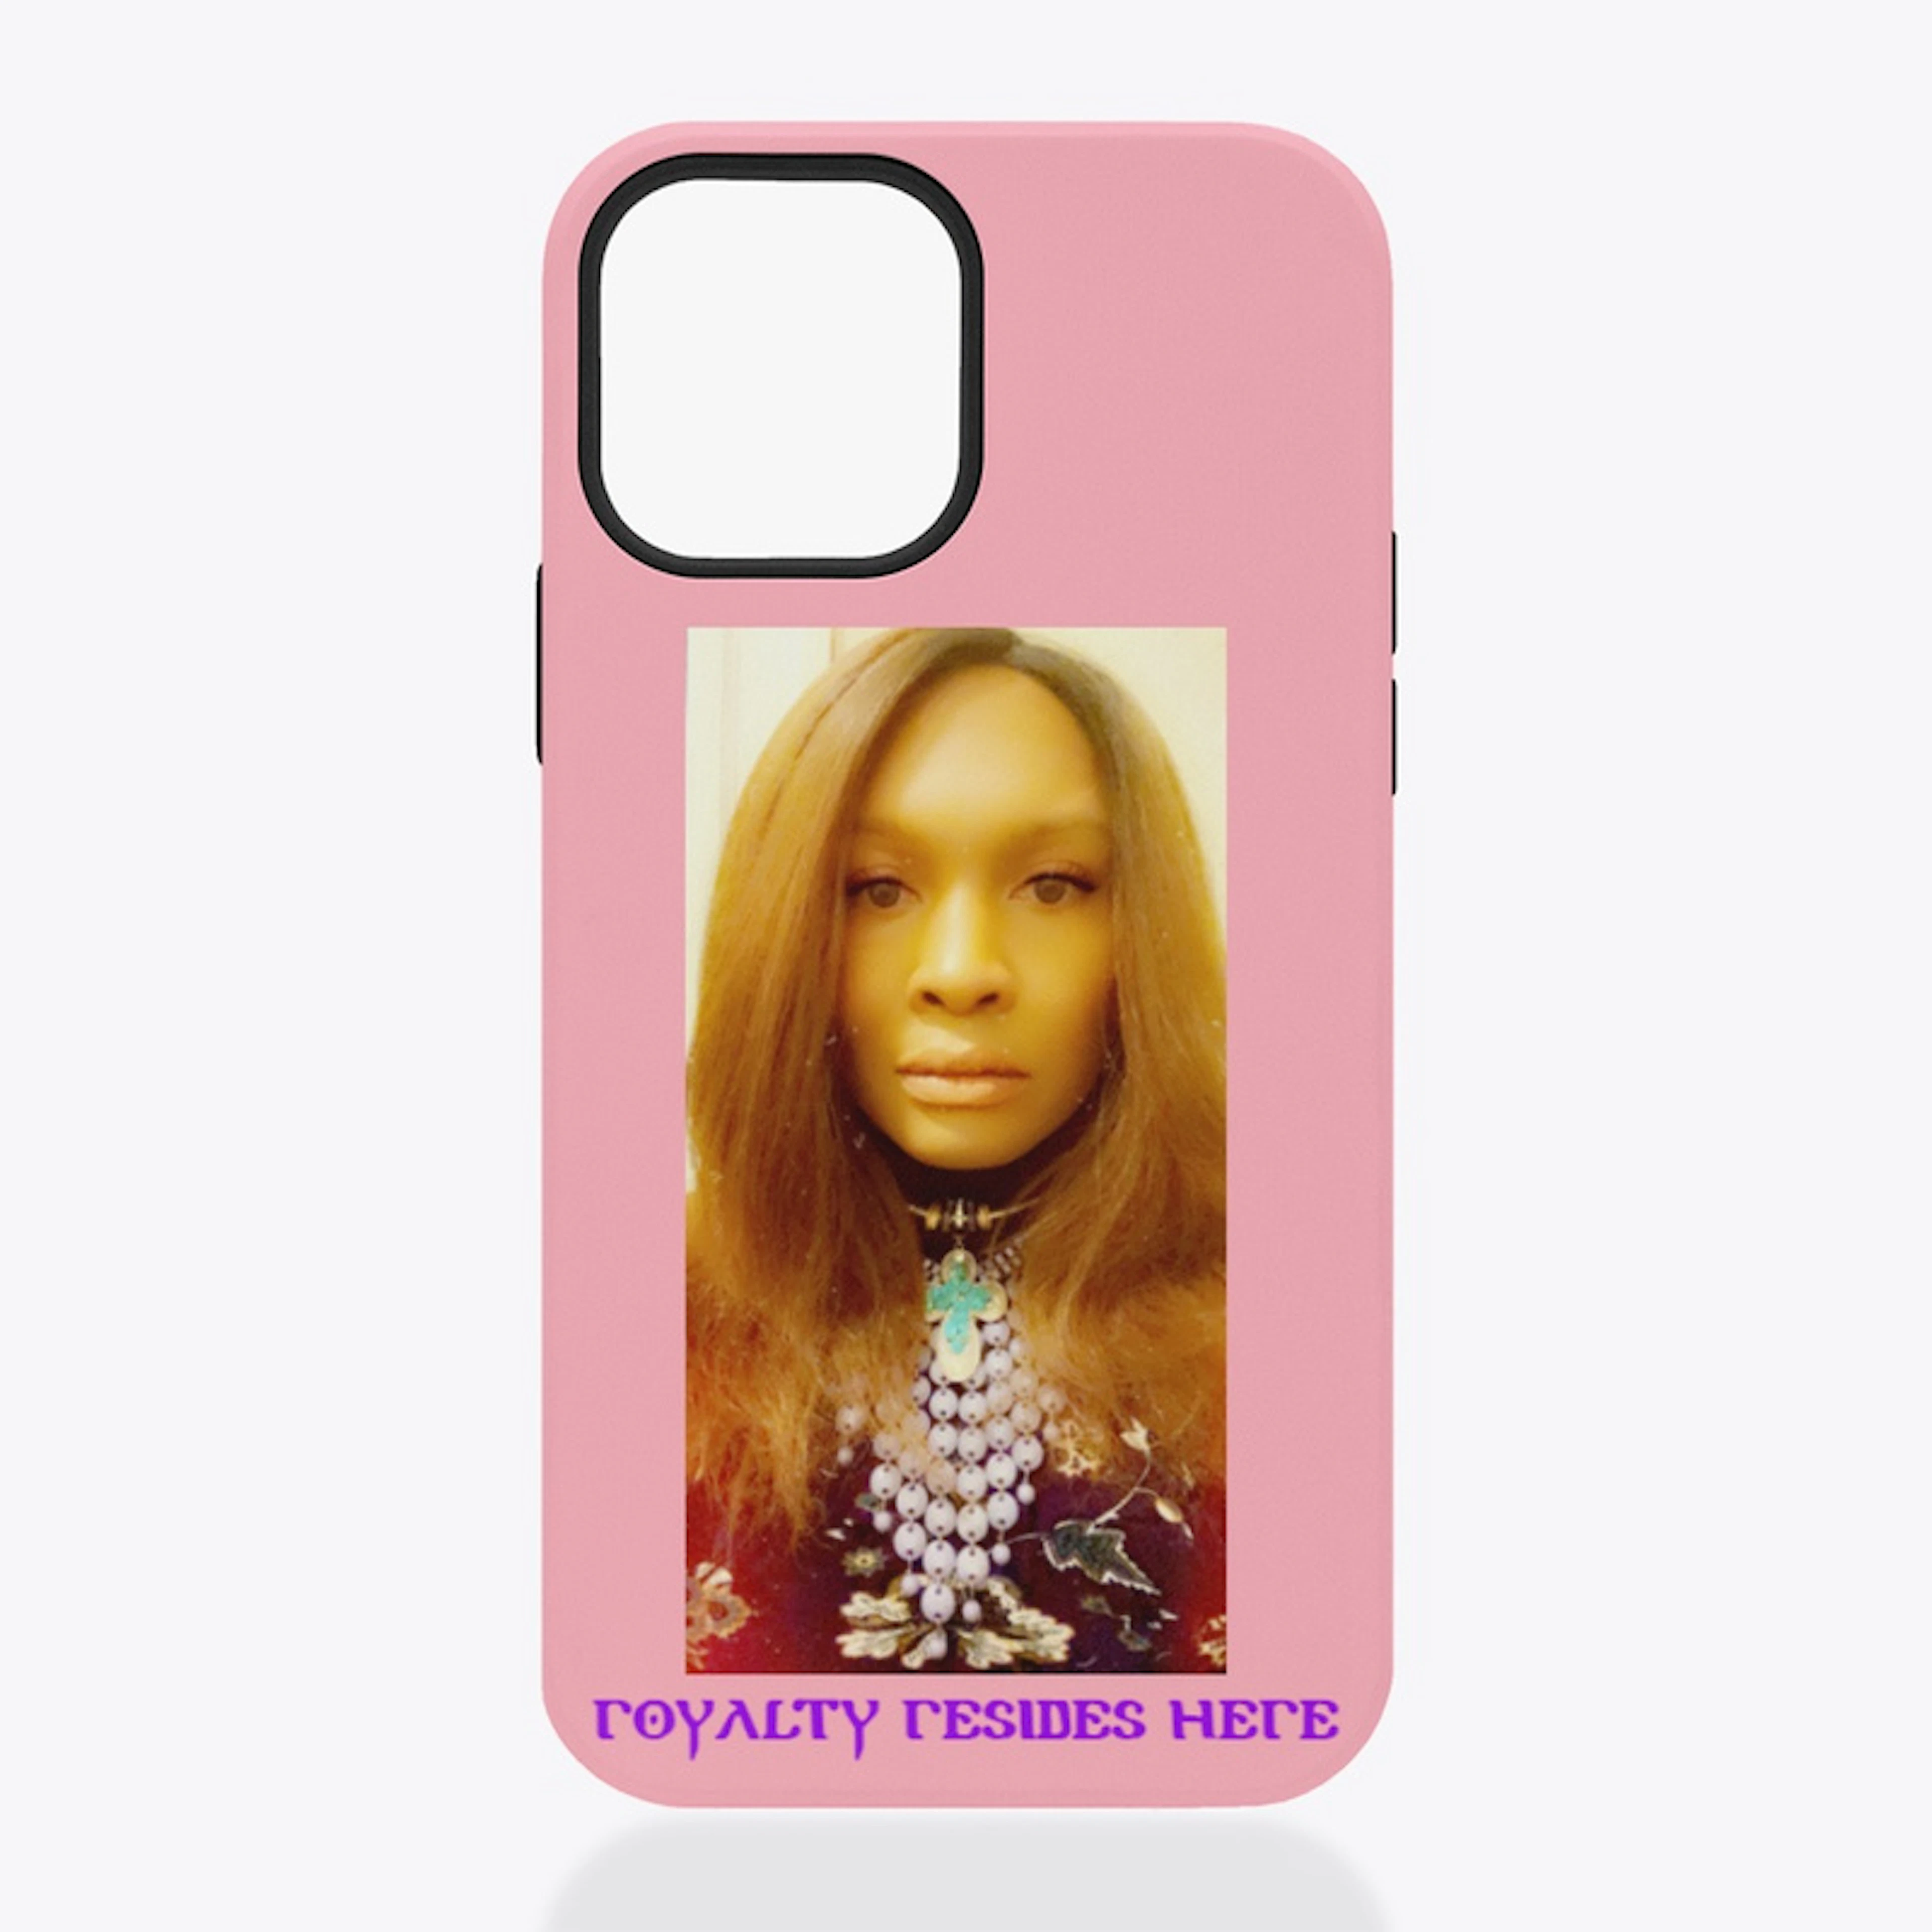 Royalty Resides Here Products